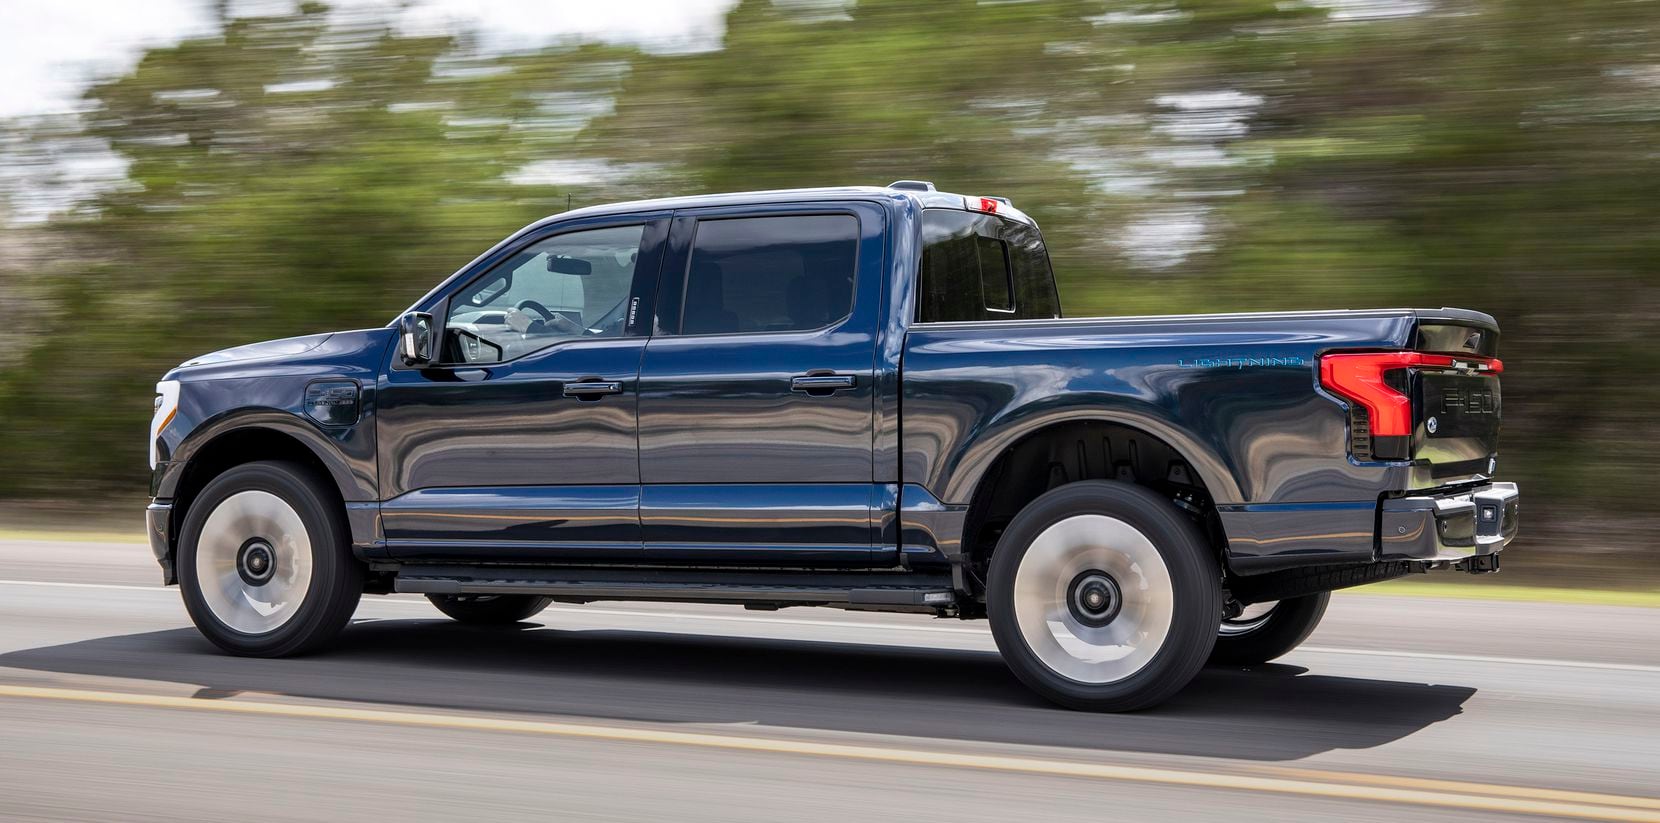 Ford F-150 Lightning Platinum is among the best EVs made, Larry Printz says.